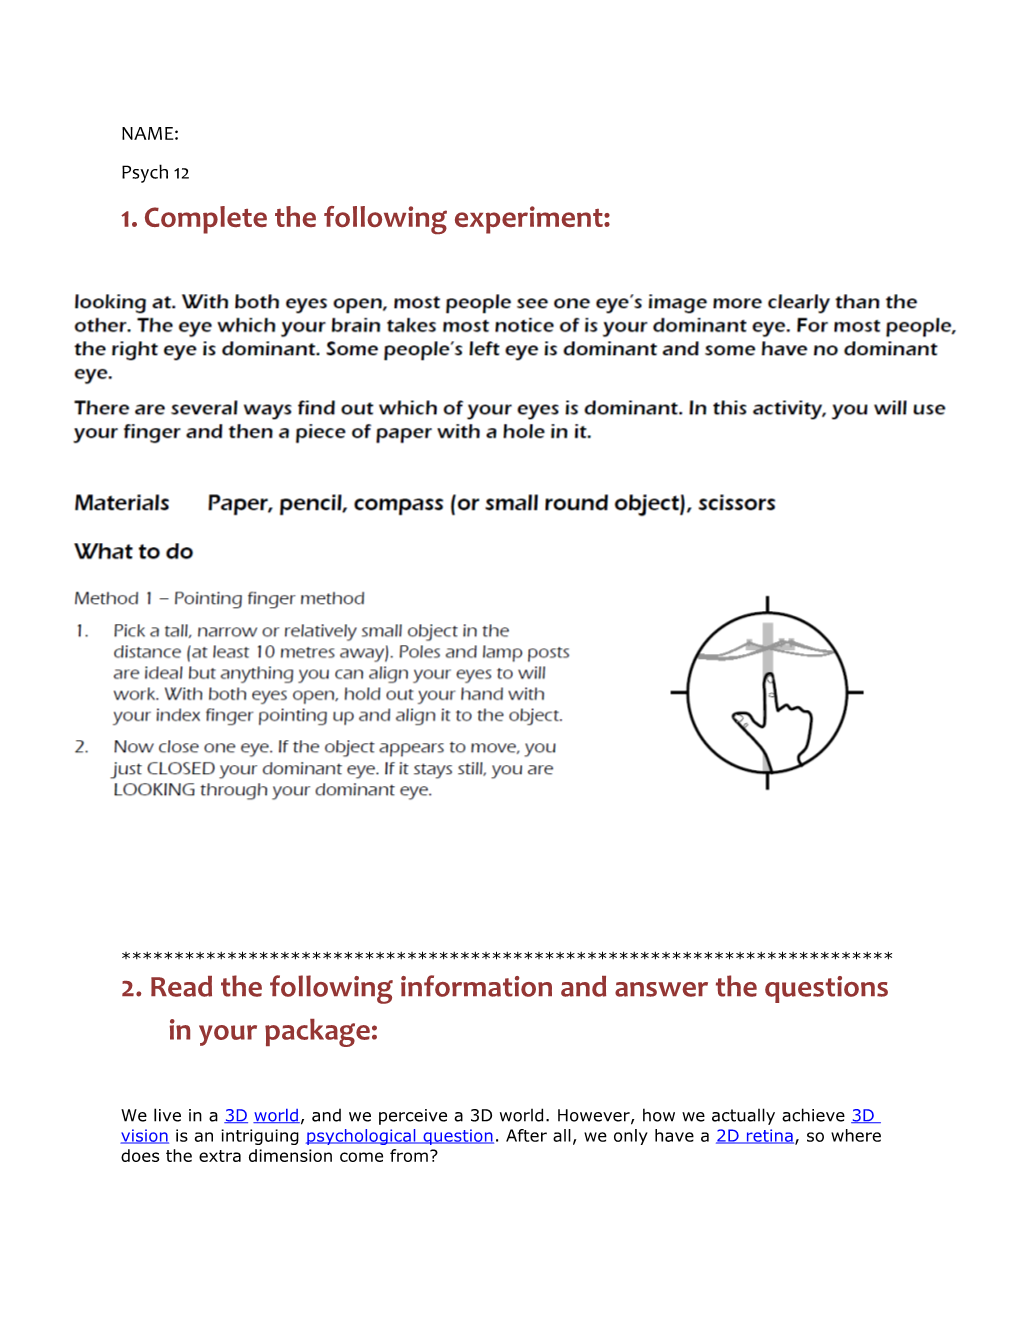 1.Complete the Following Experiment